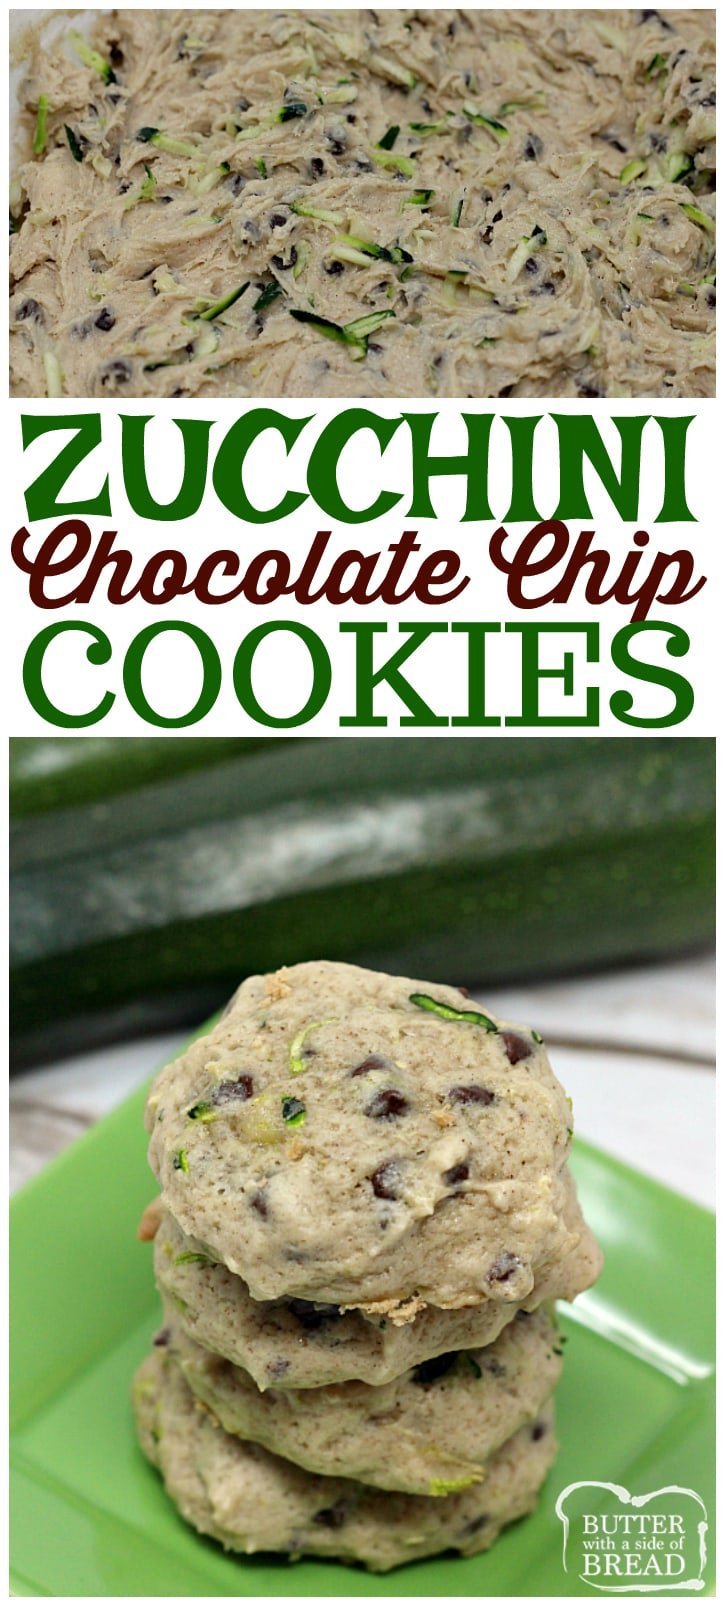 Zucchini Chocolate Chip Cookies are a soft, delicious, and healthy dessert! This zucchini chocolate chip cookie recipe is a perfect way to sneak in some veggies into your treats.